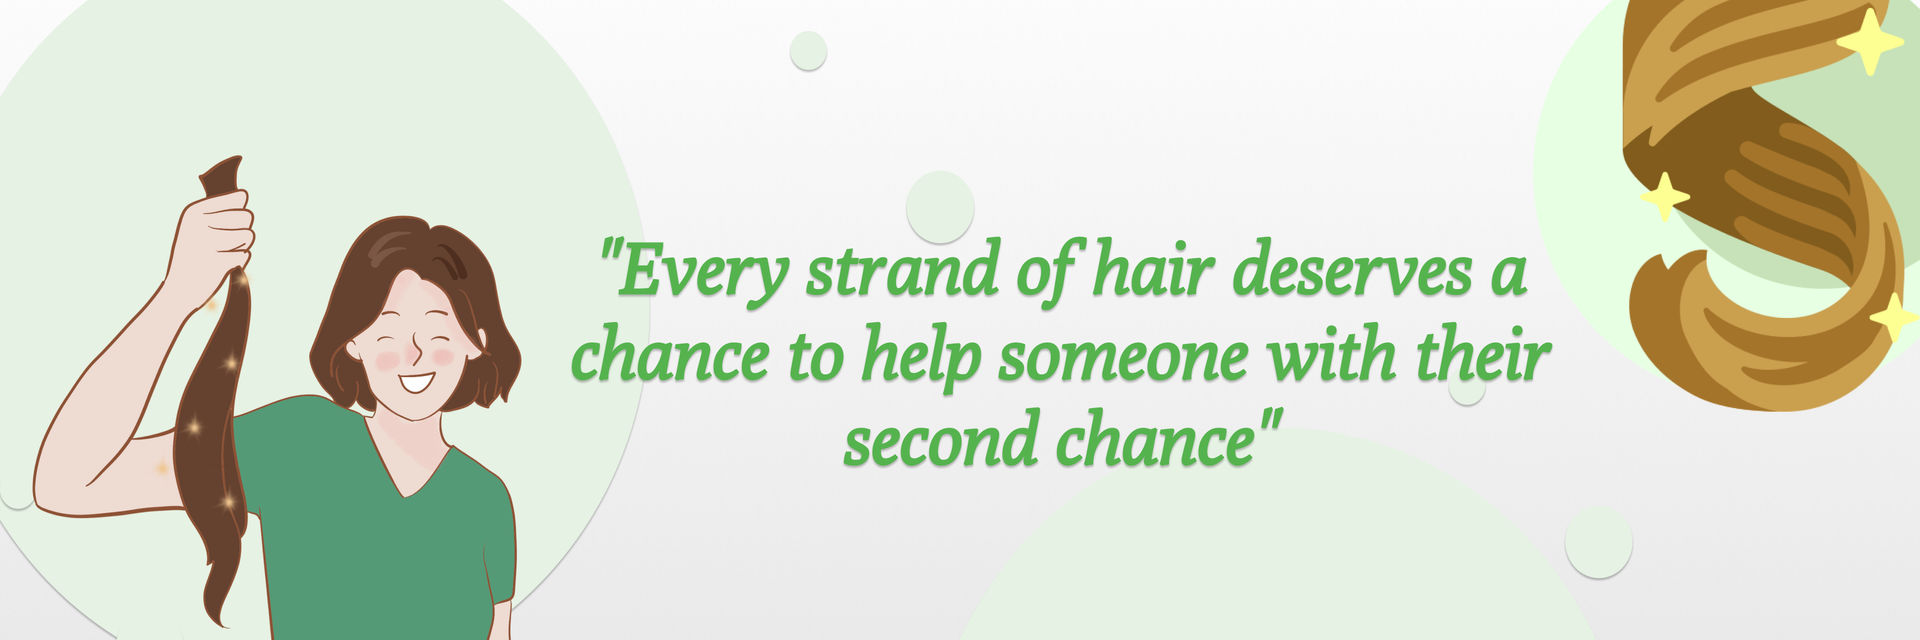 Hair Donation to Cancer Patients, Donate Your Hair in Support